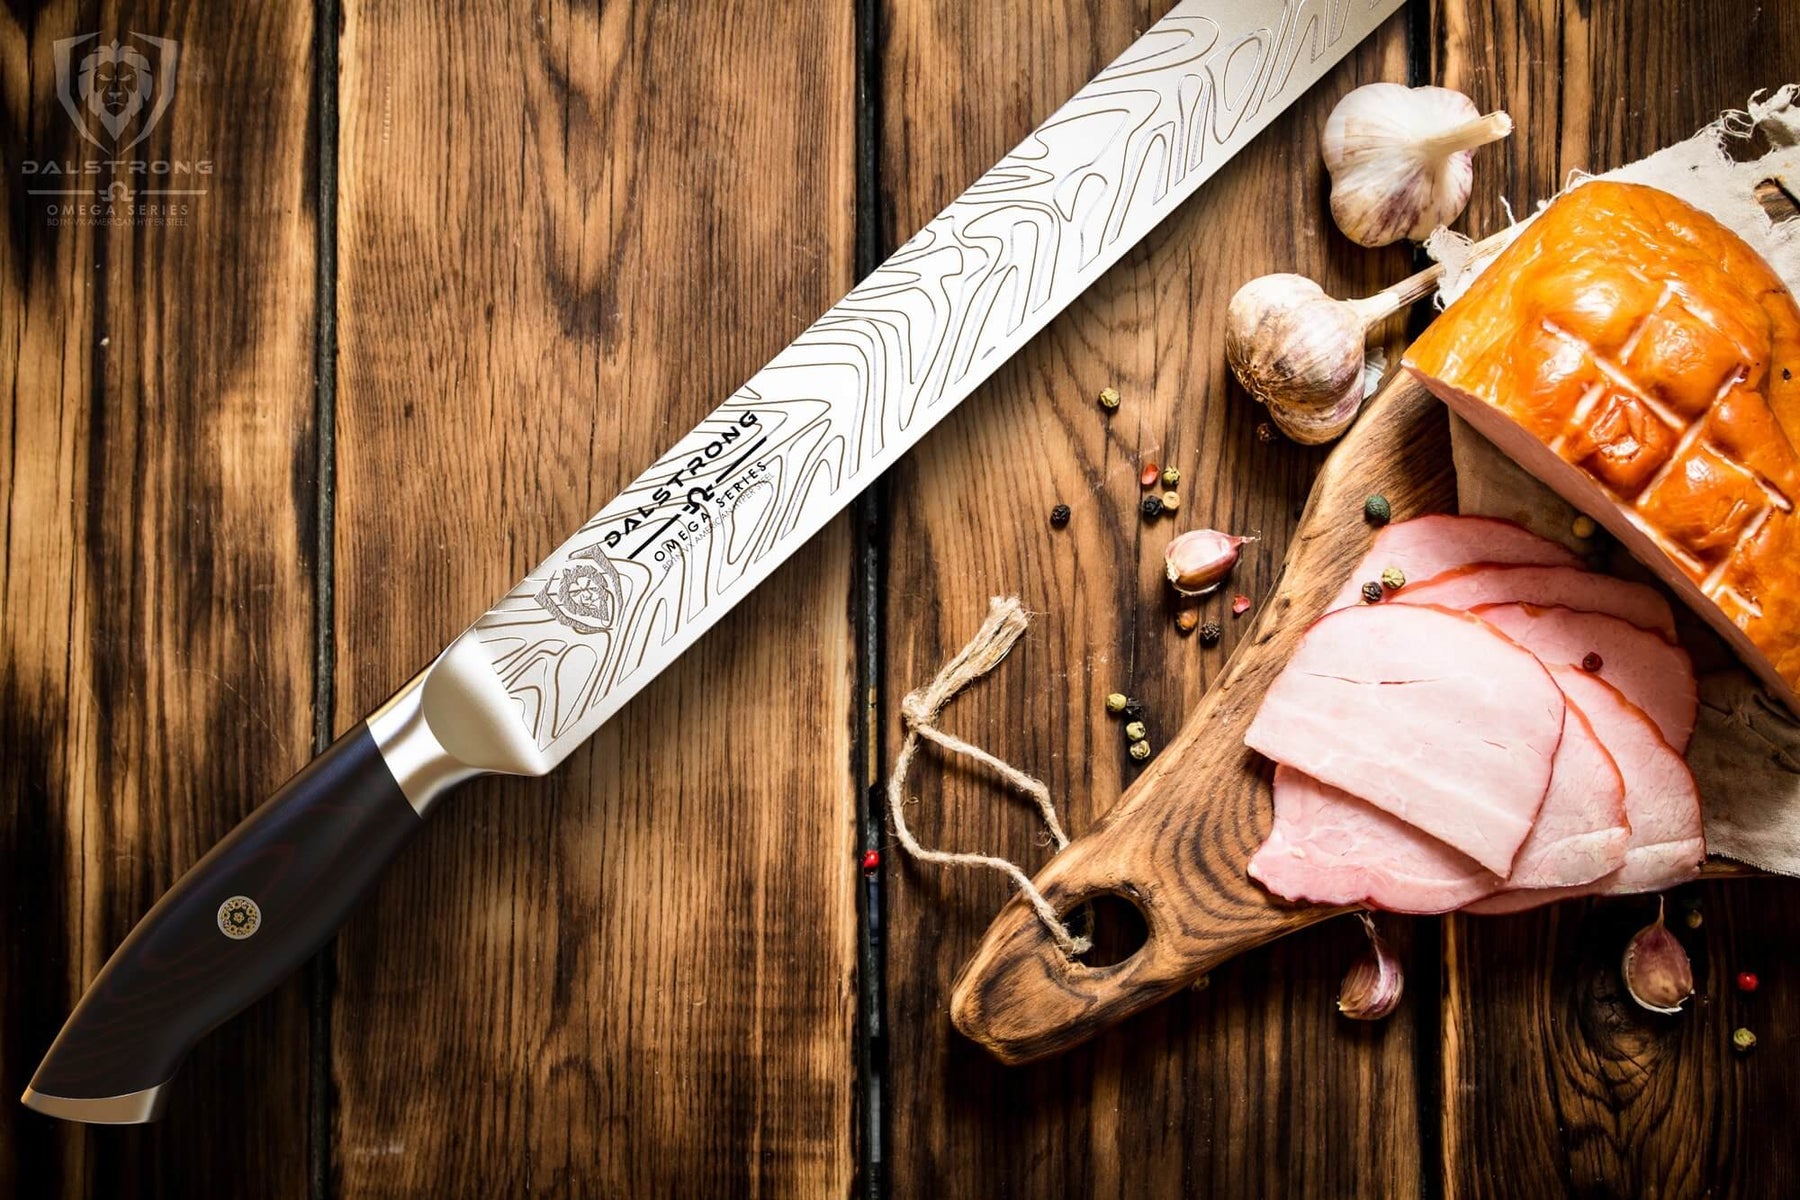 Slice and dice like the pros with this set of Japanese knives, now $350 off